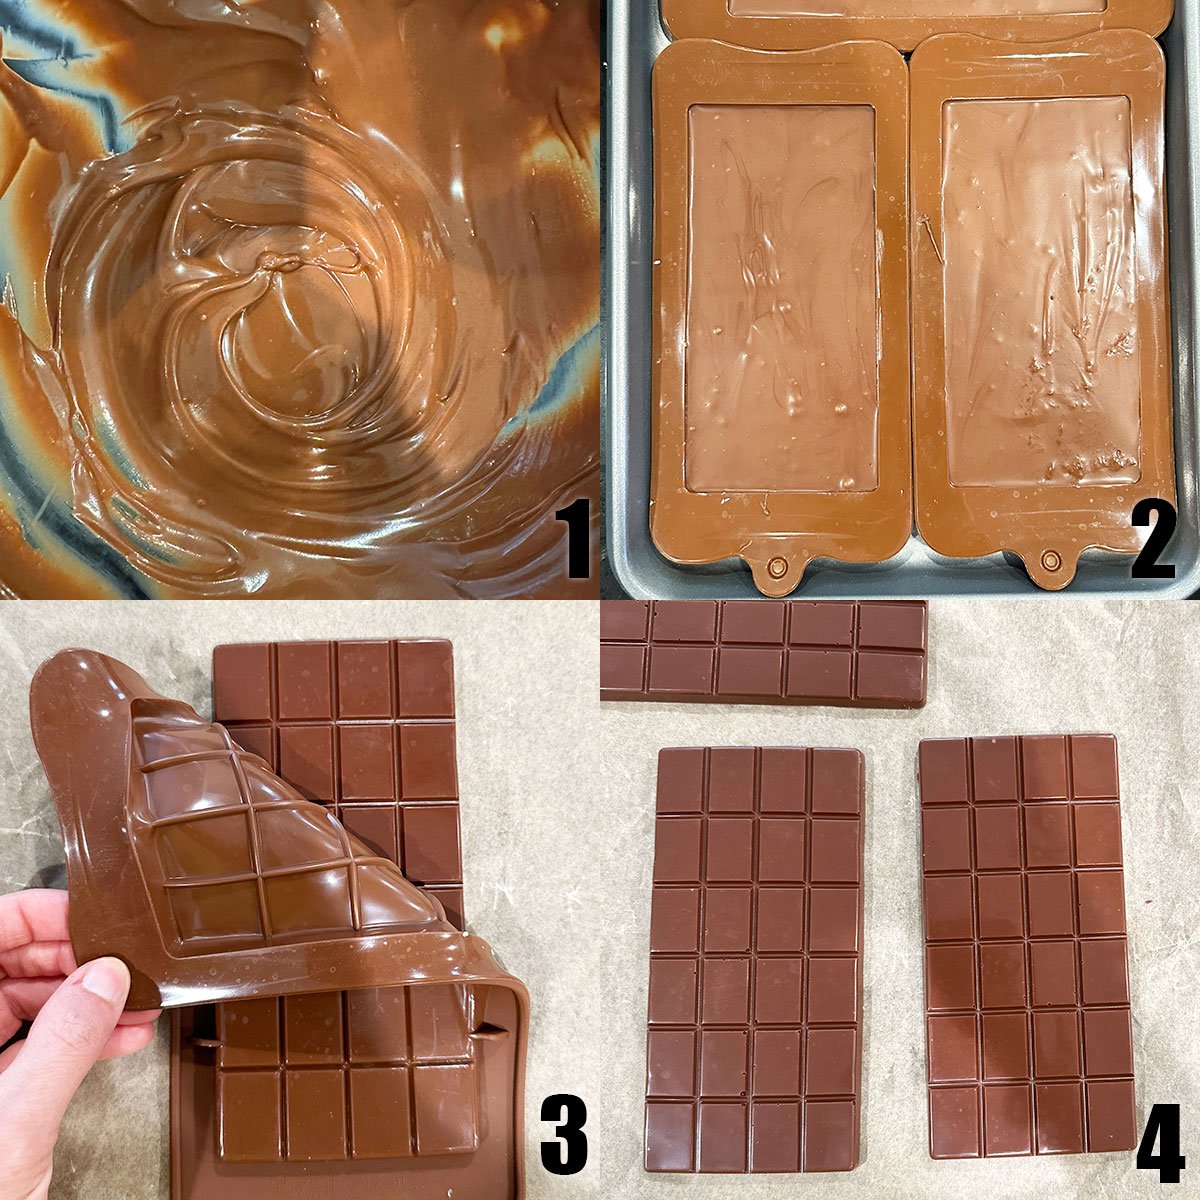 Collage Image With Step by Step Process Shots on How to Make Homemade Chocolate Bars.